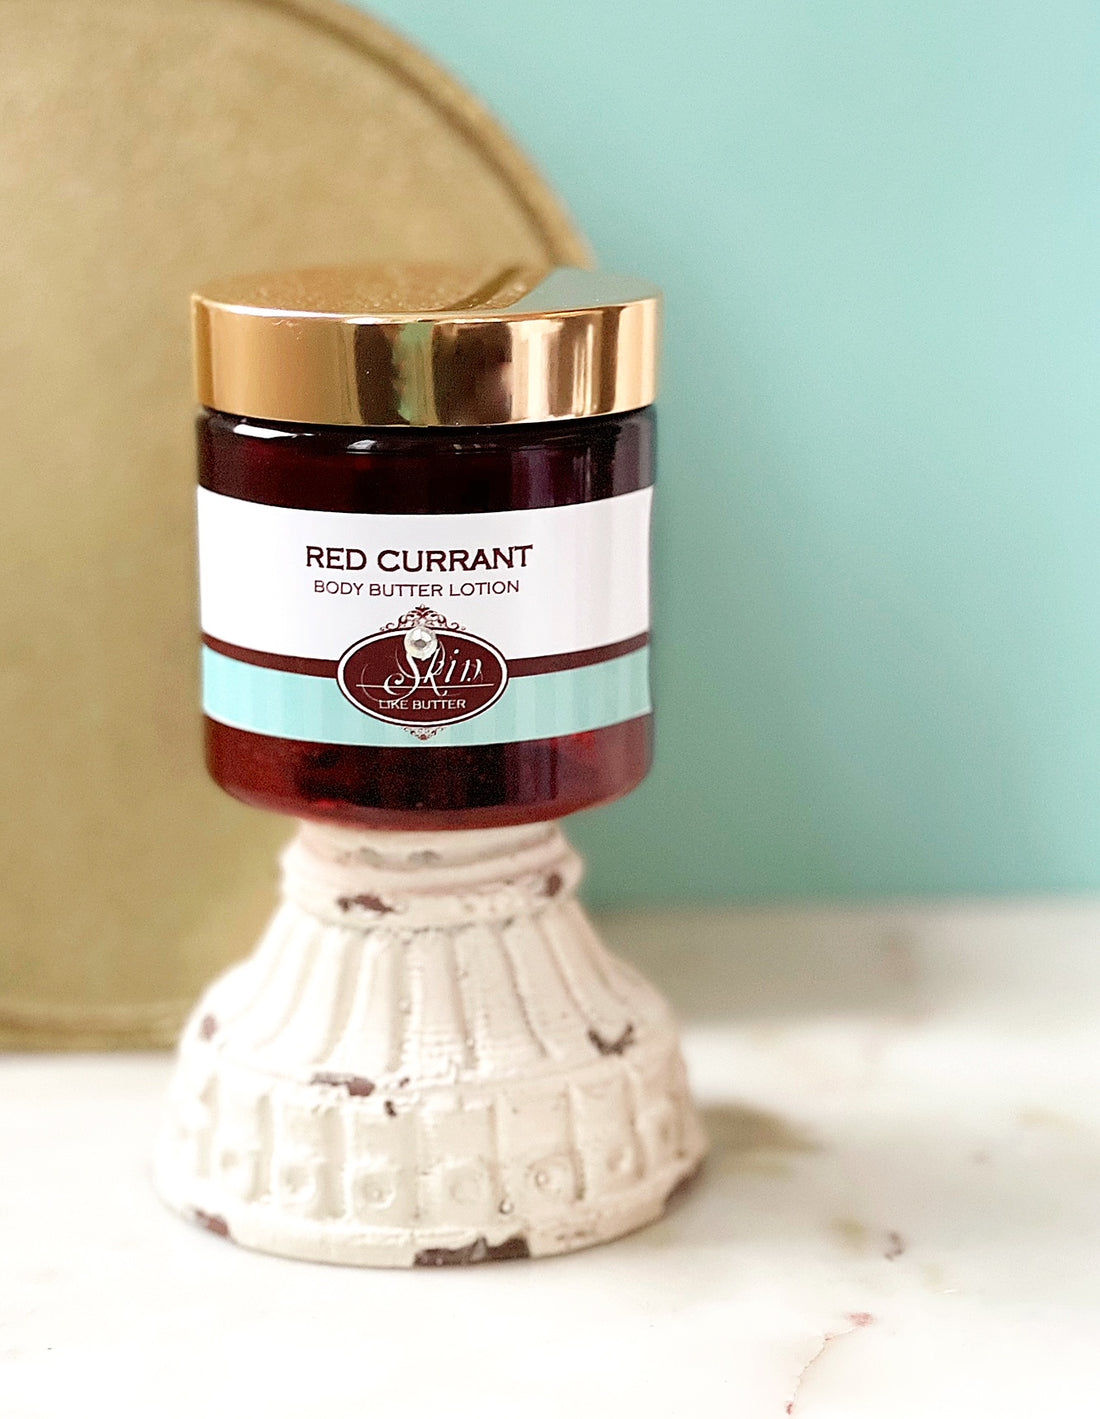 RED CURRANT scented water free, vegan non-greasy Body Butter Lotion